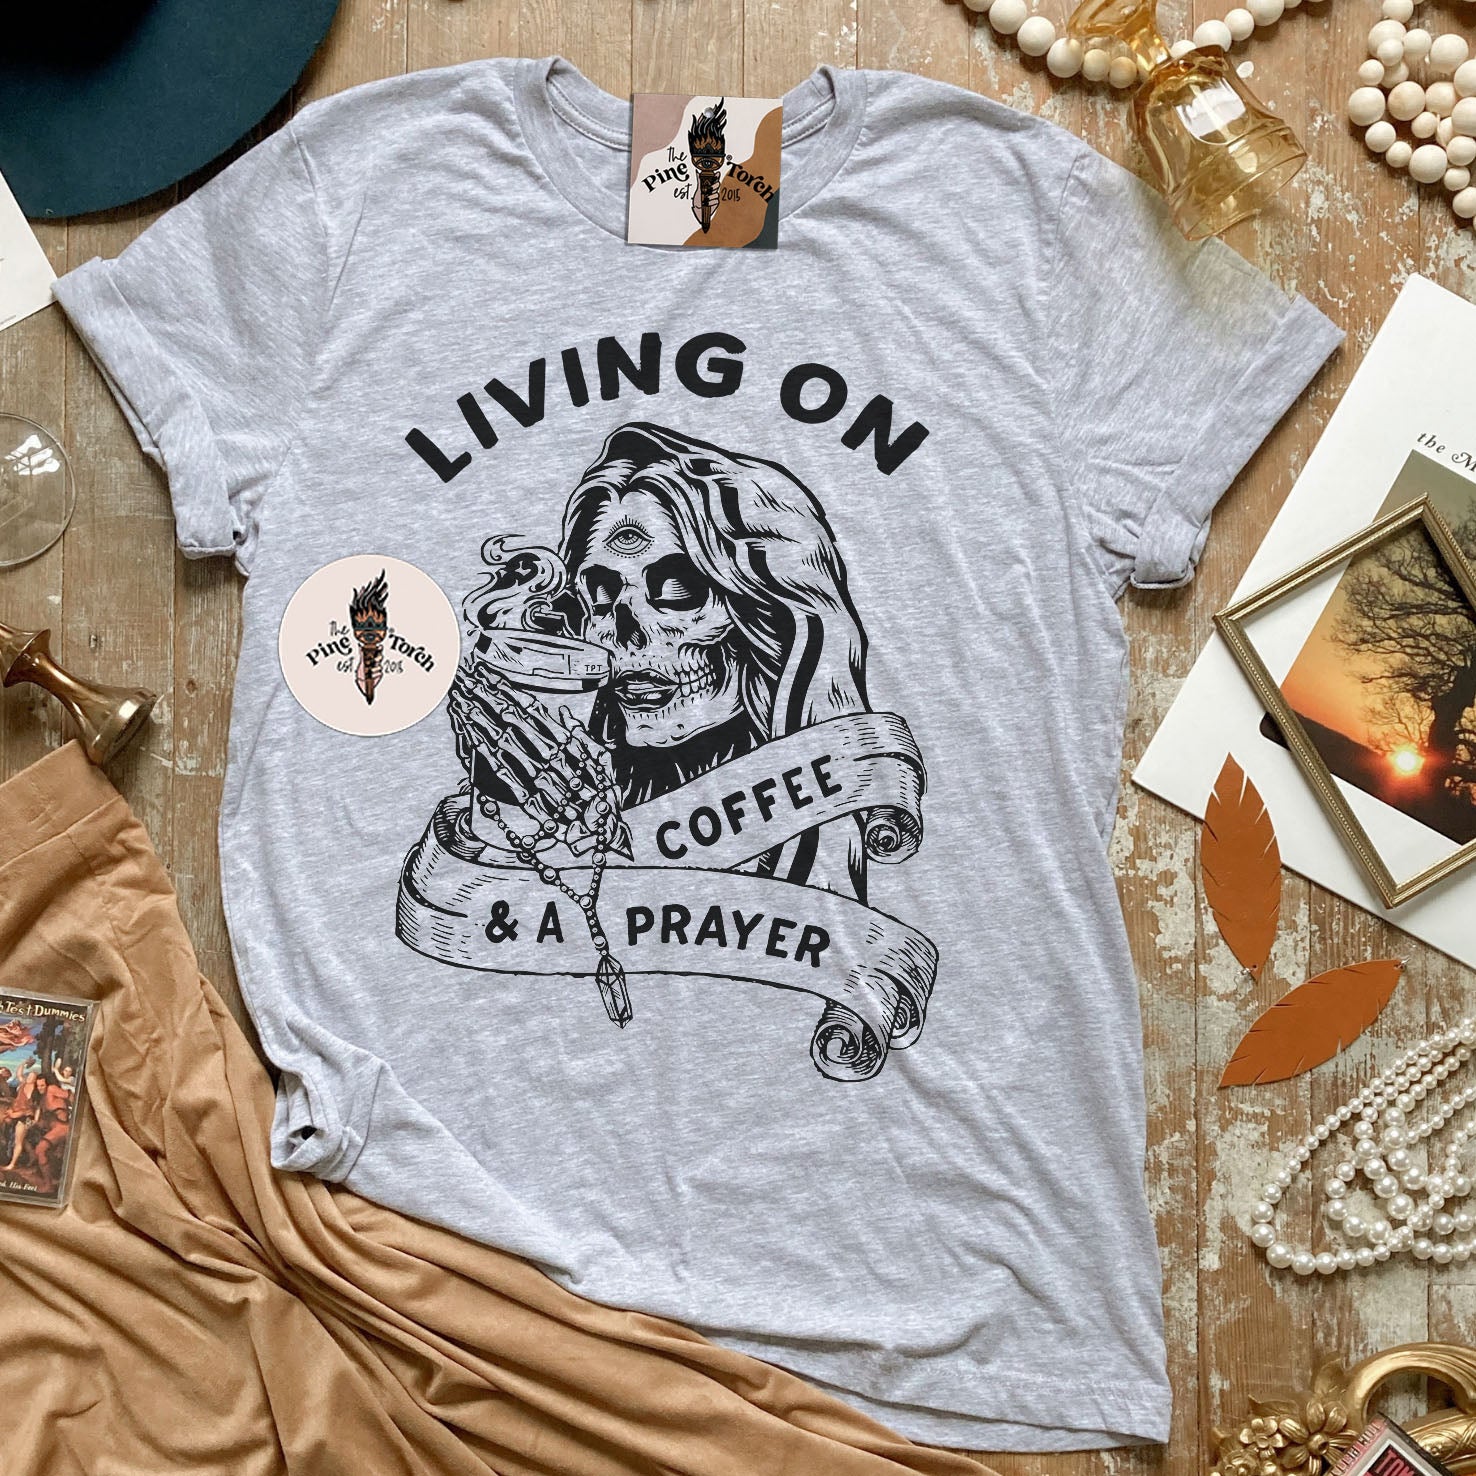 LIVING ON COFFEE AND A PRAYER // UNISEX TEE